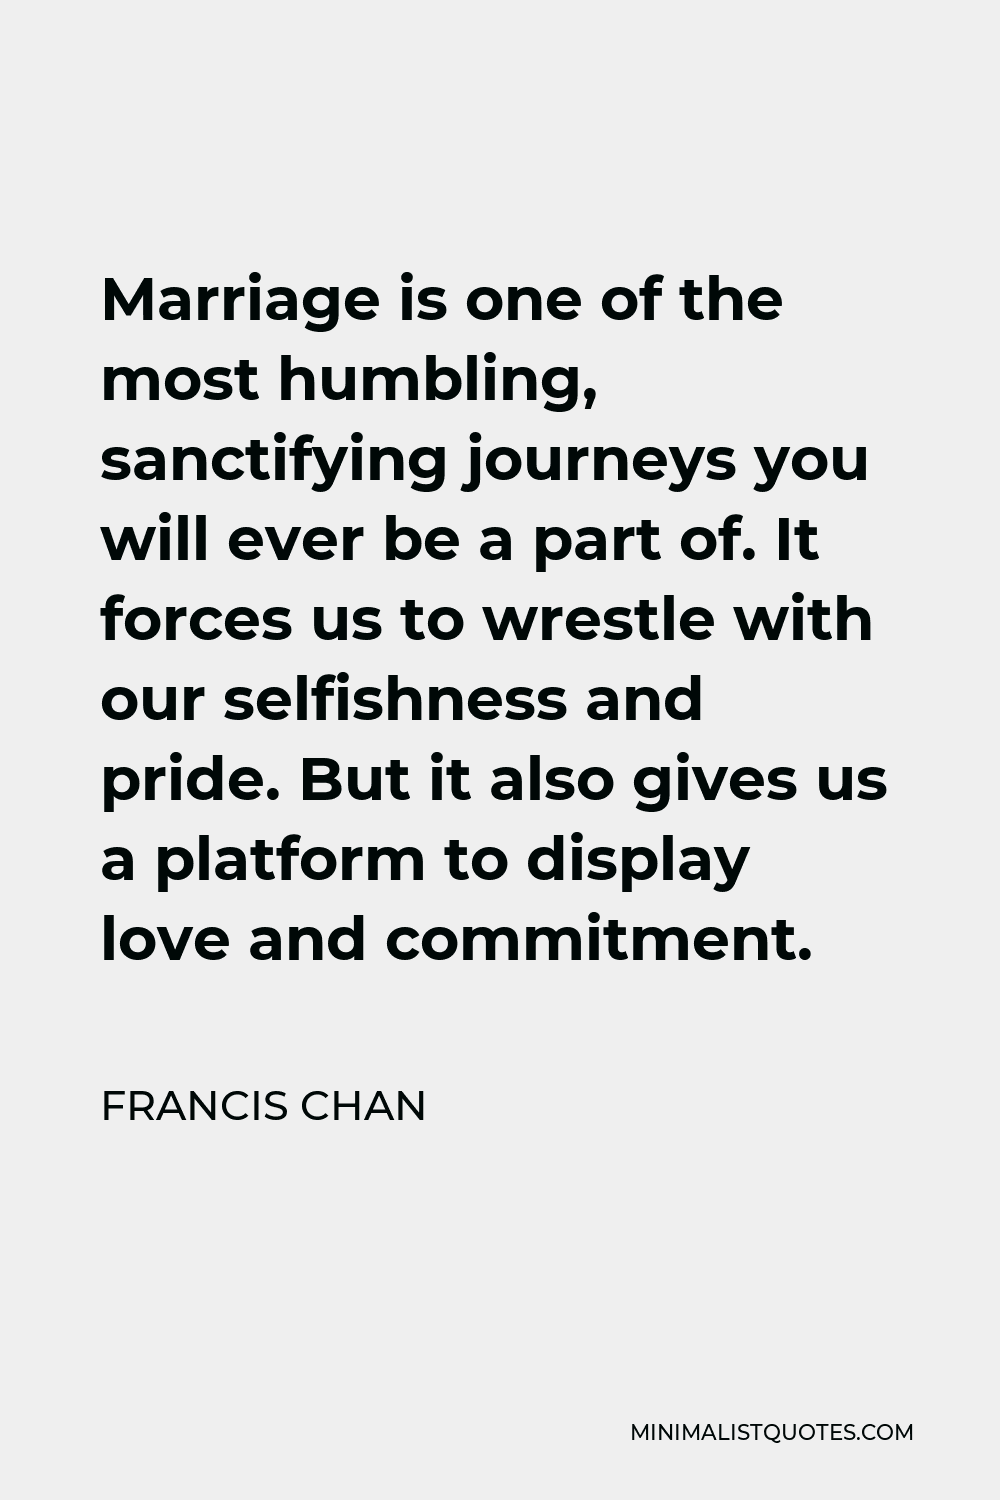 Francis Chan Quote - Marriage is one of the most humbling, sanctifying journeys you will ever be a part of. It forces us to wrestle with our selfishness and pride. But it also gives us a platform to display love and commitment.